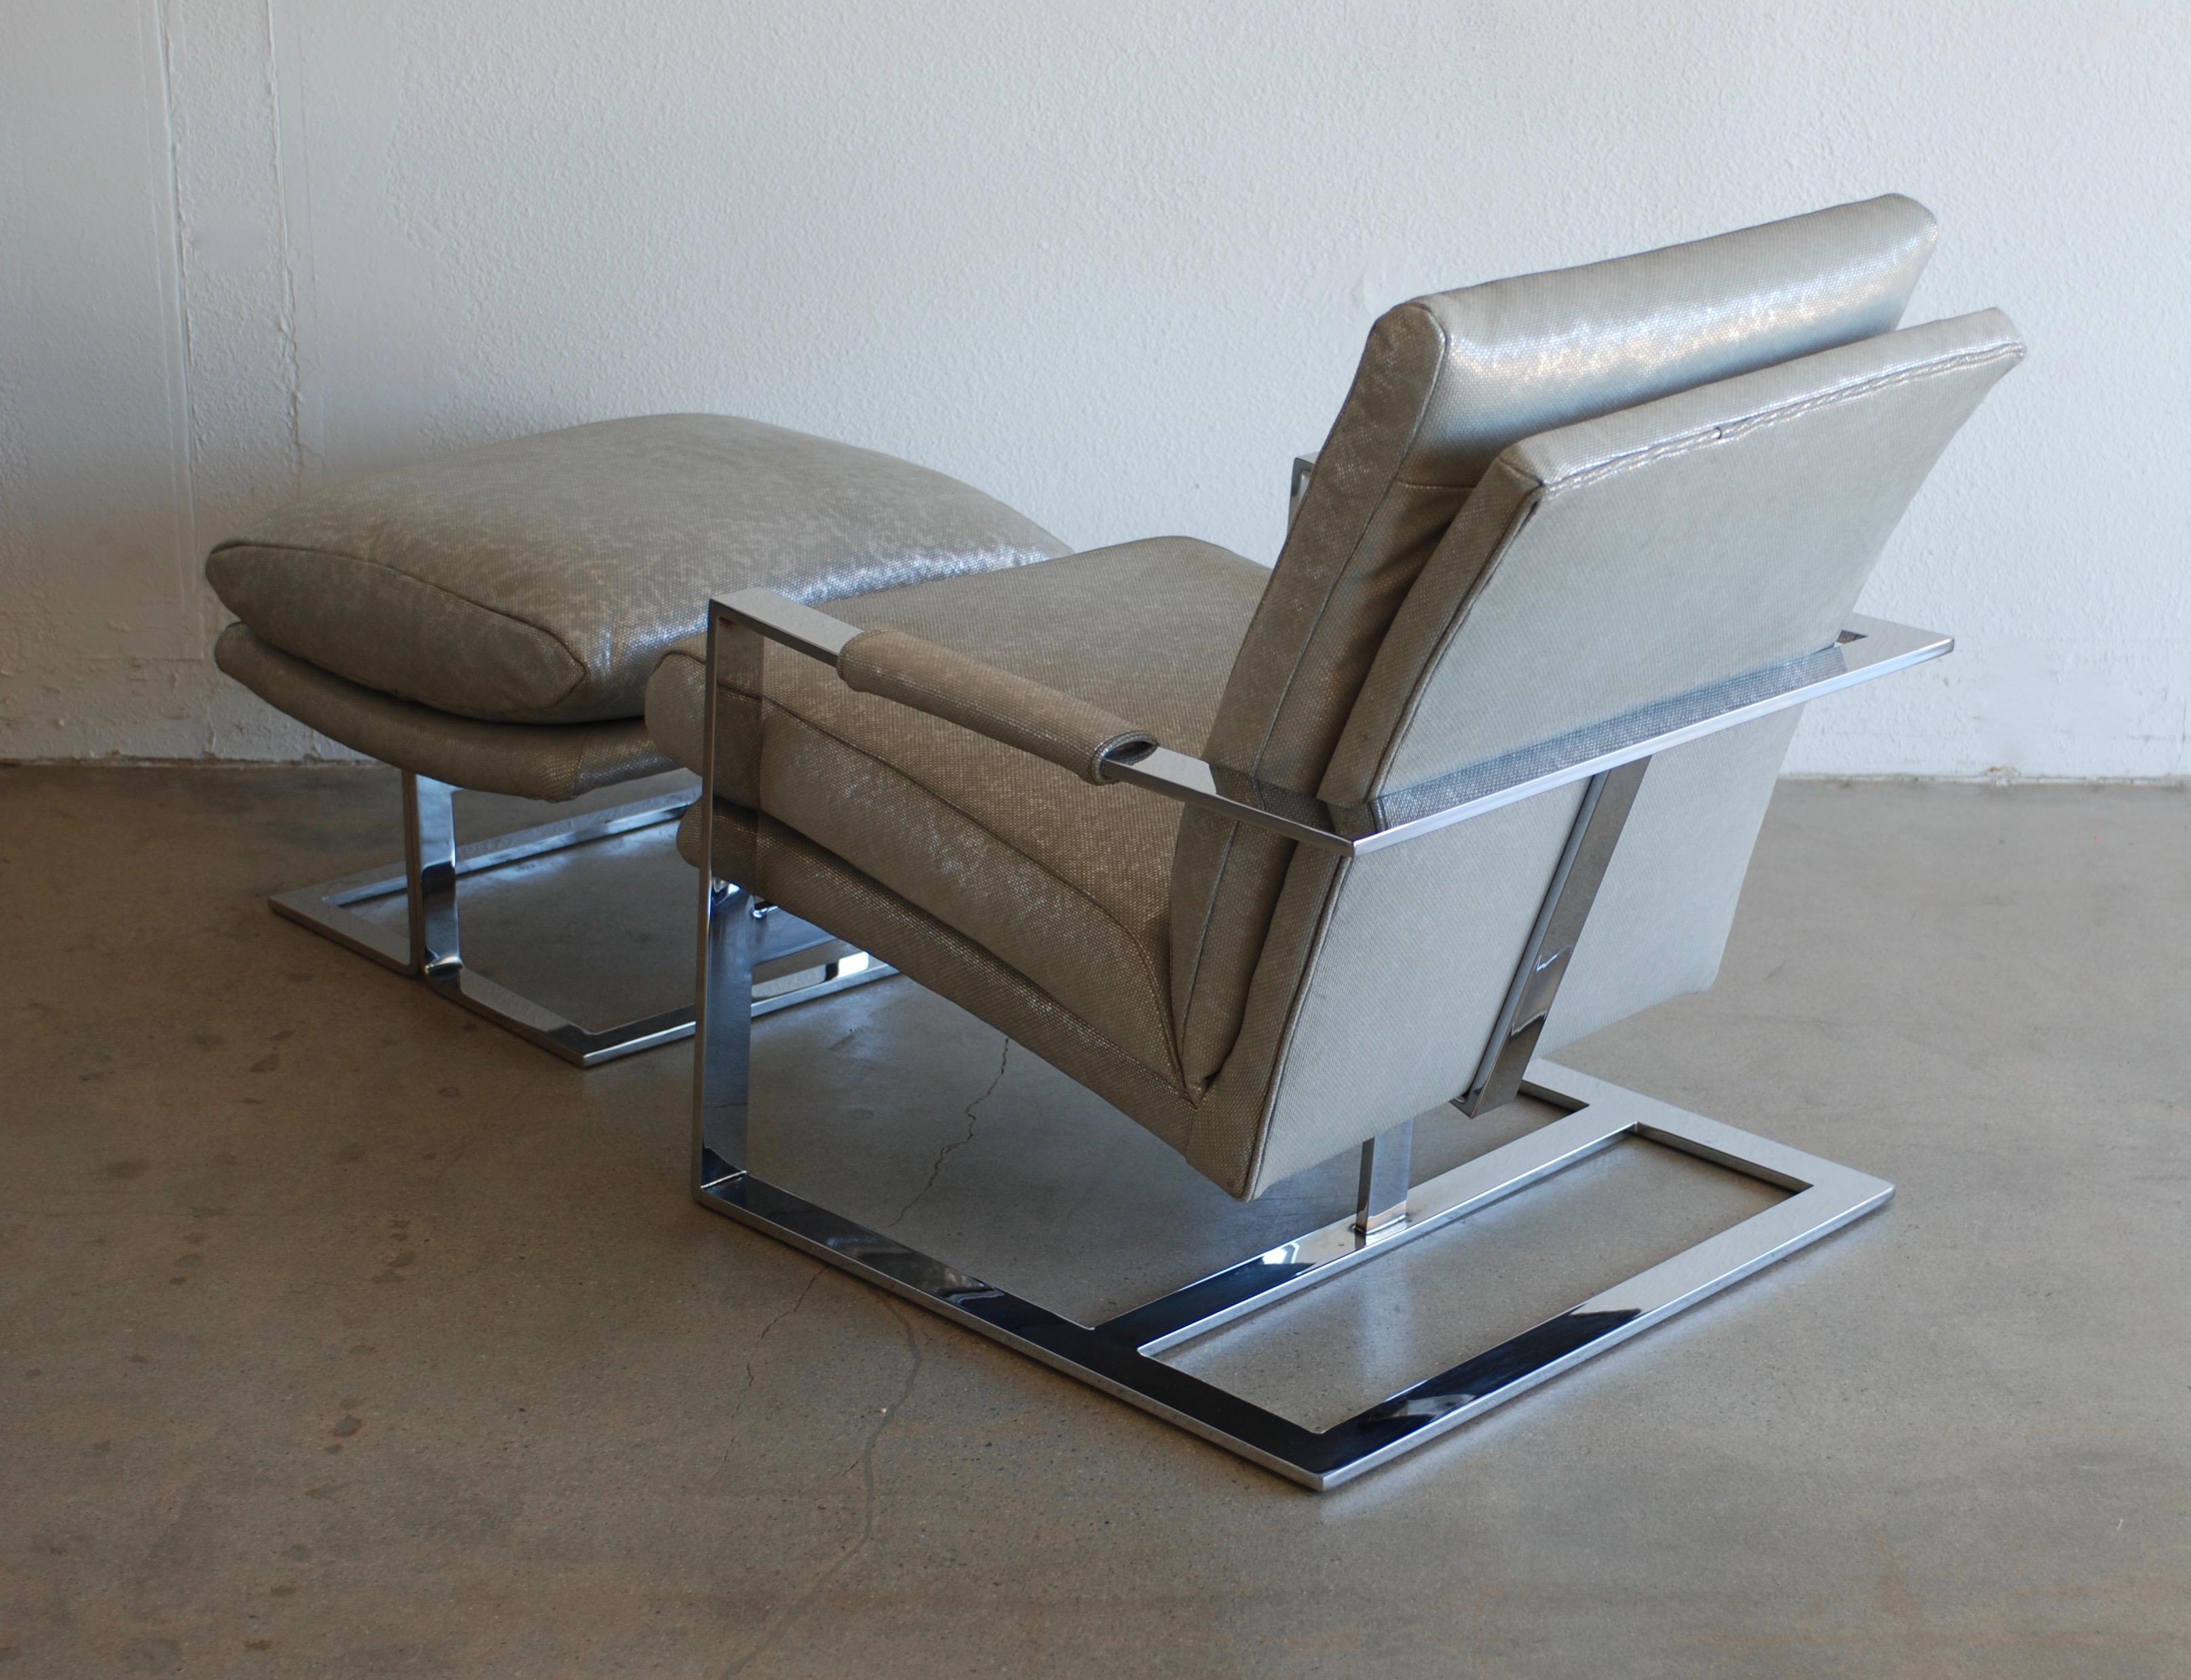 This vintage 1970s Milo Baughman style lounge chair and ottoman has been recovered
in a buttery soft silver metallic Edelman leather. The leather is embossed with a circular pattern and has an opalescent quality to it. The chrome flat bar frame is